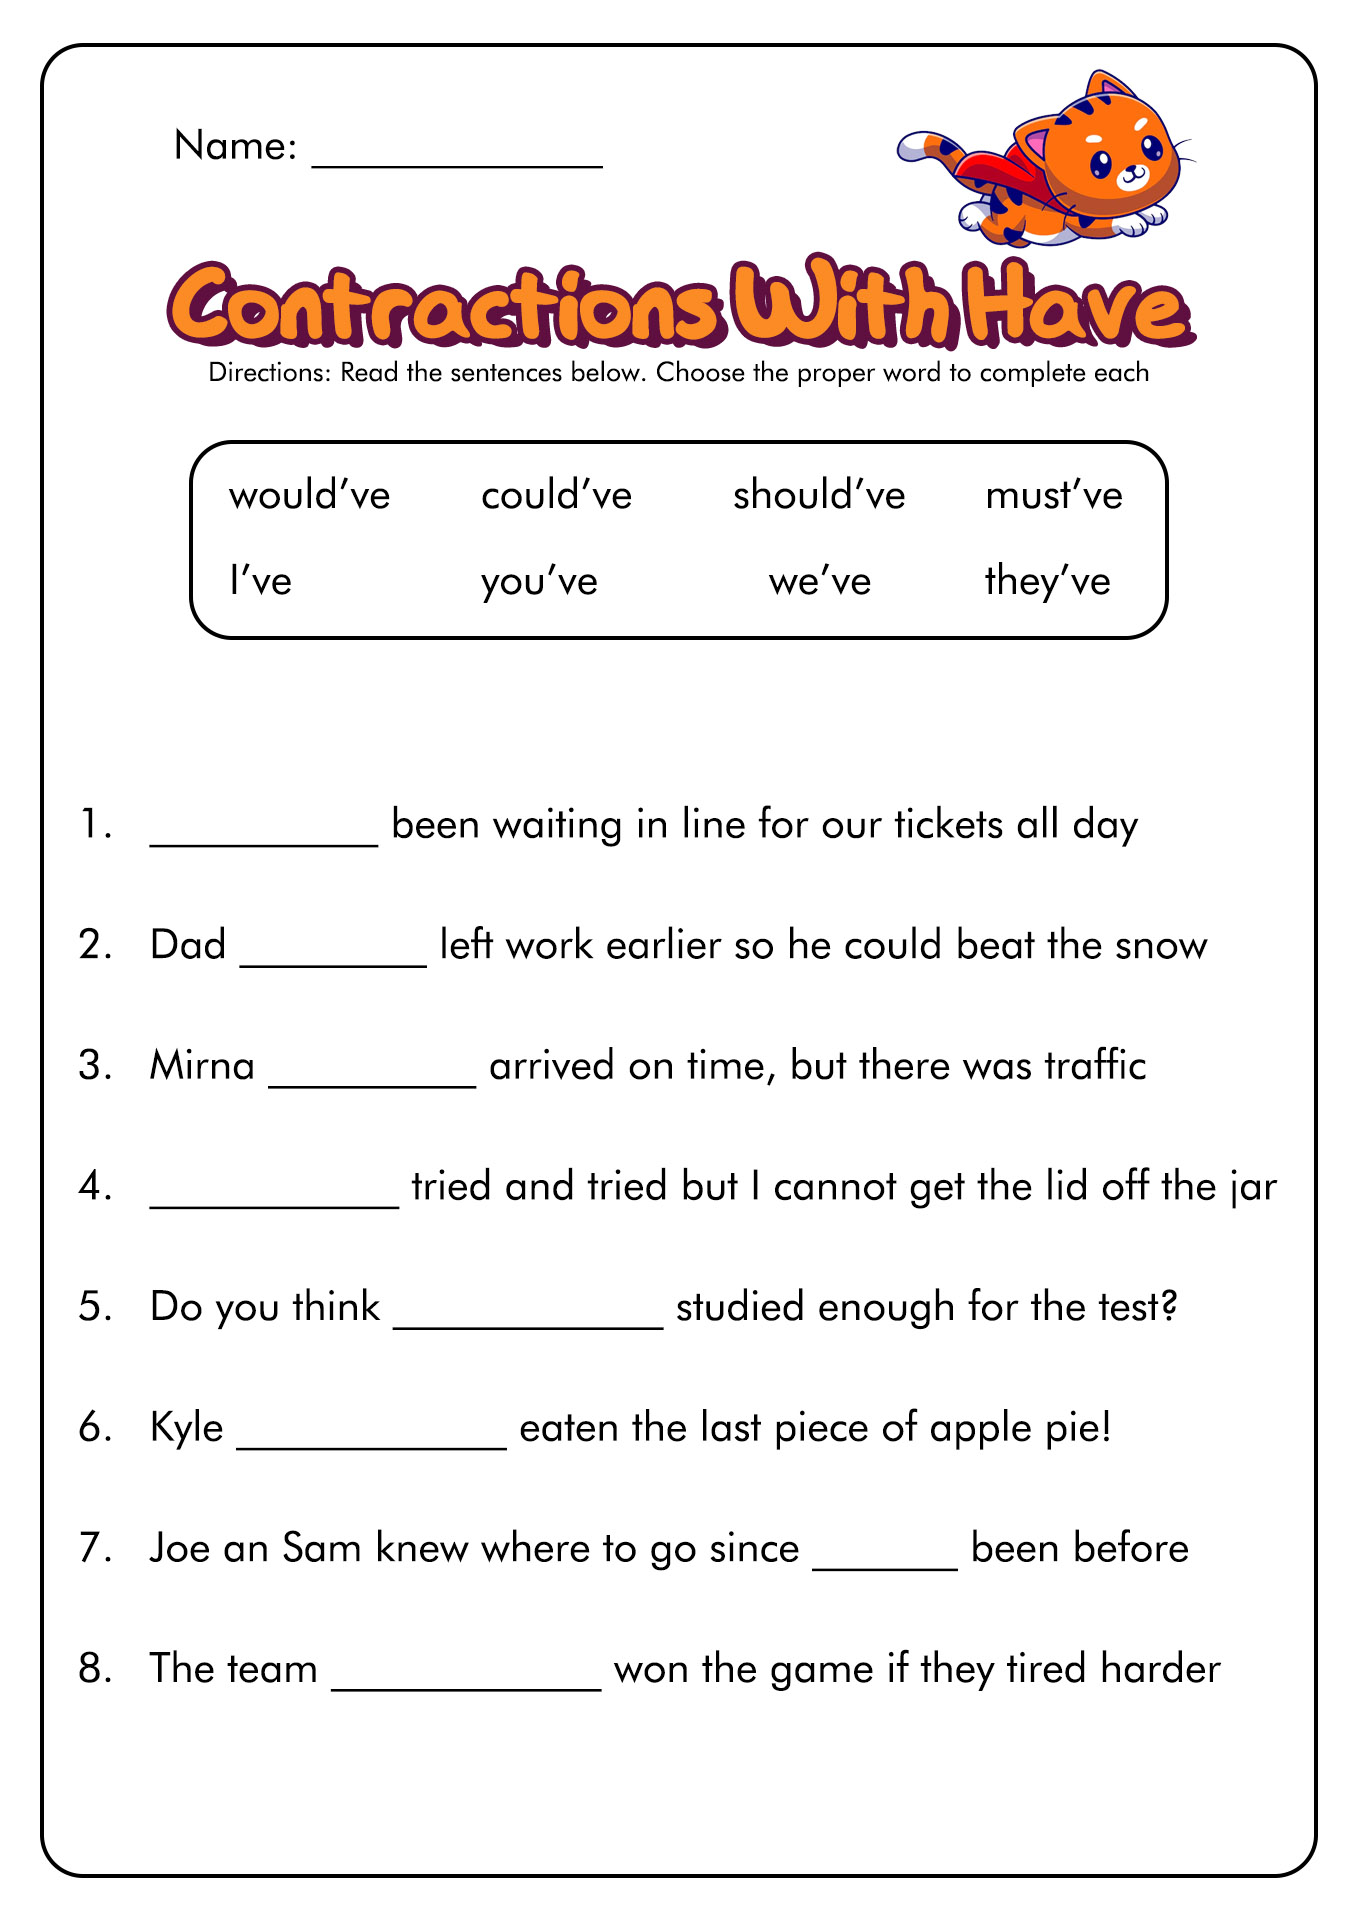 15-pronoun-contractions-worksheets-worksheeto